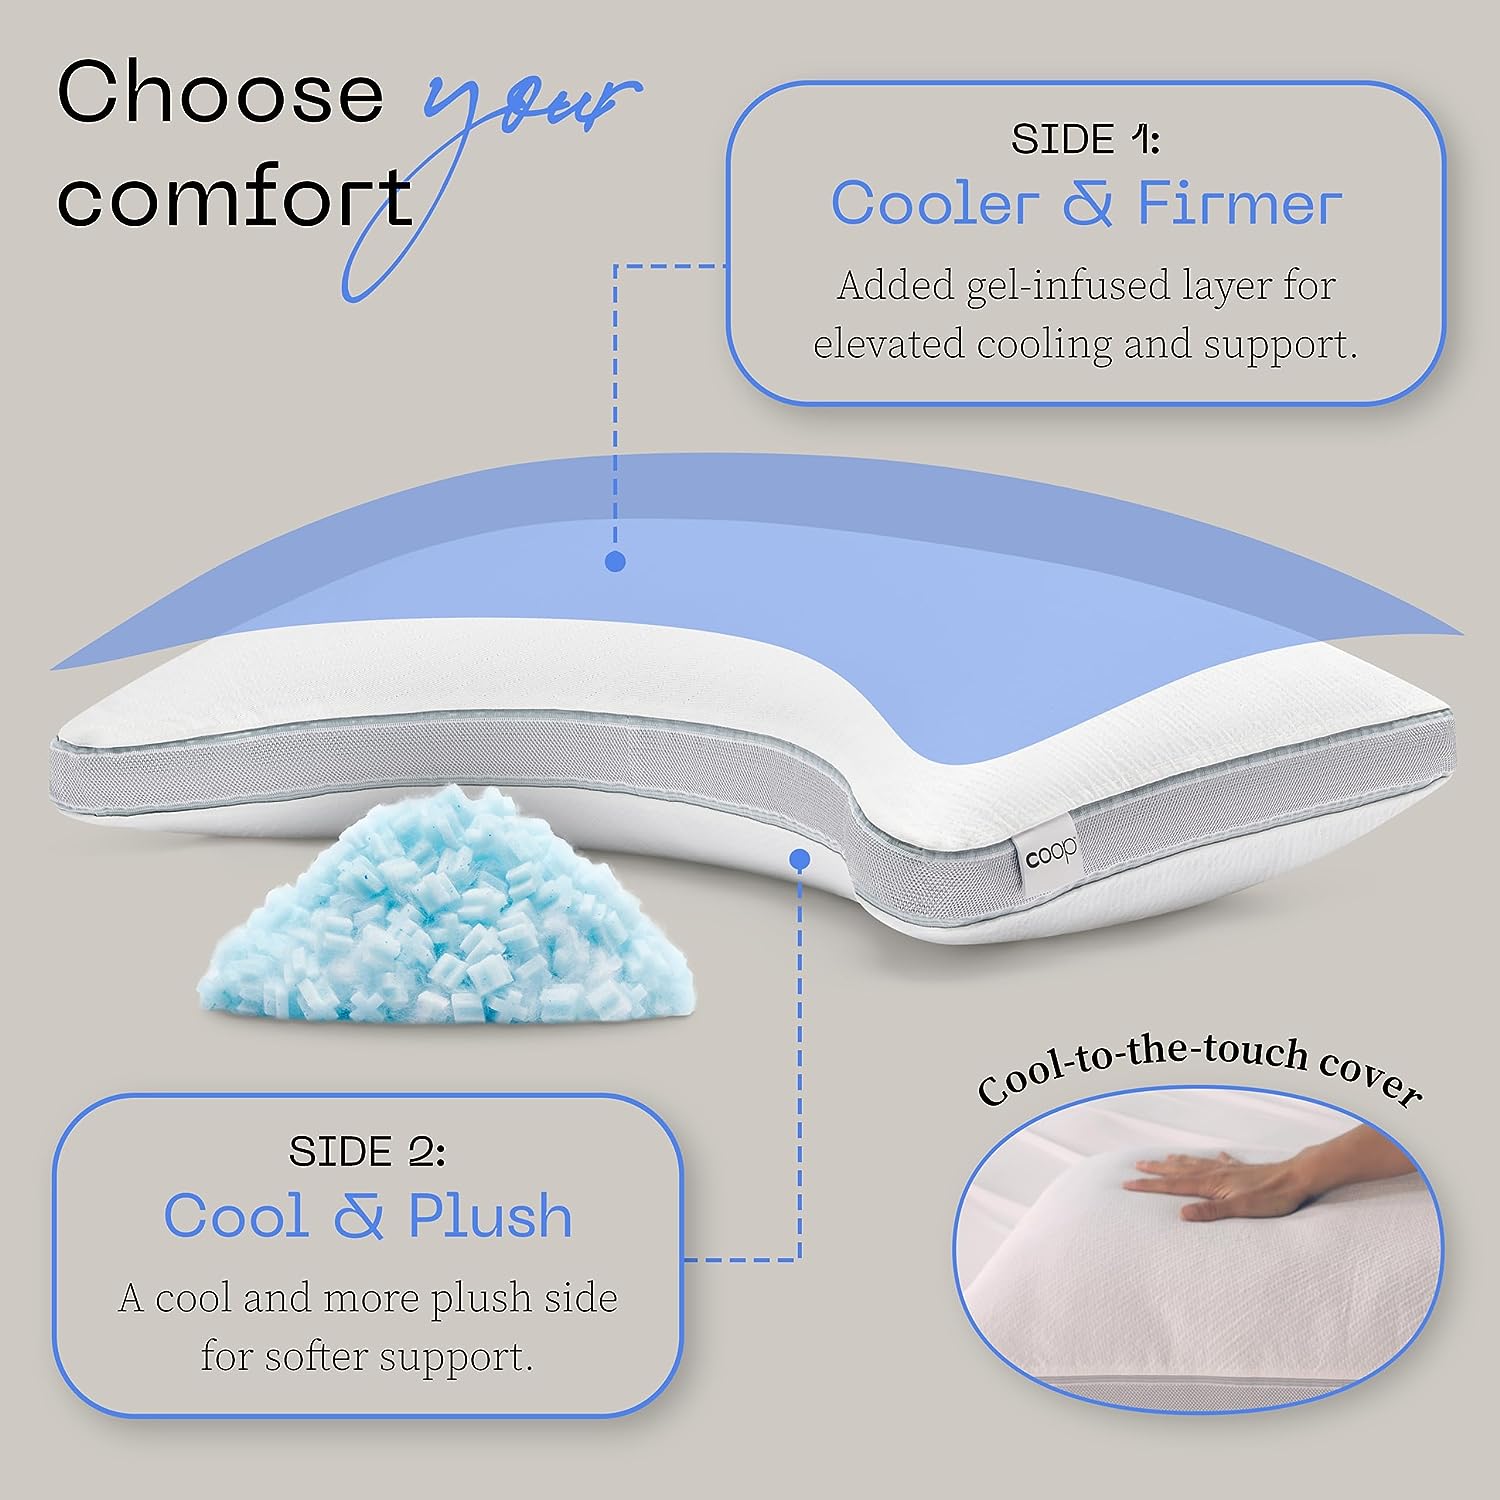 https://bigbigmart.com/wp-content/uploads/2023/08/Coop-Home-Goods-Eden-Cool-Crescent-Pillow-Queen-Size-Plus-Shaped-Memory-Foam-Pillows-with-Cooling-Gel-Back-or-Side-Sleeper-Pillow-Adjustable-Neck-Support-for-Sleeping-CertiPUR-US-GREENGUARD-Gold3.jpg